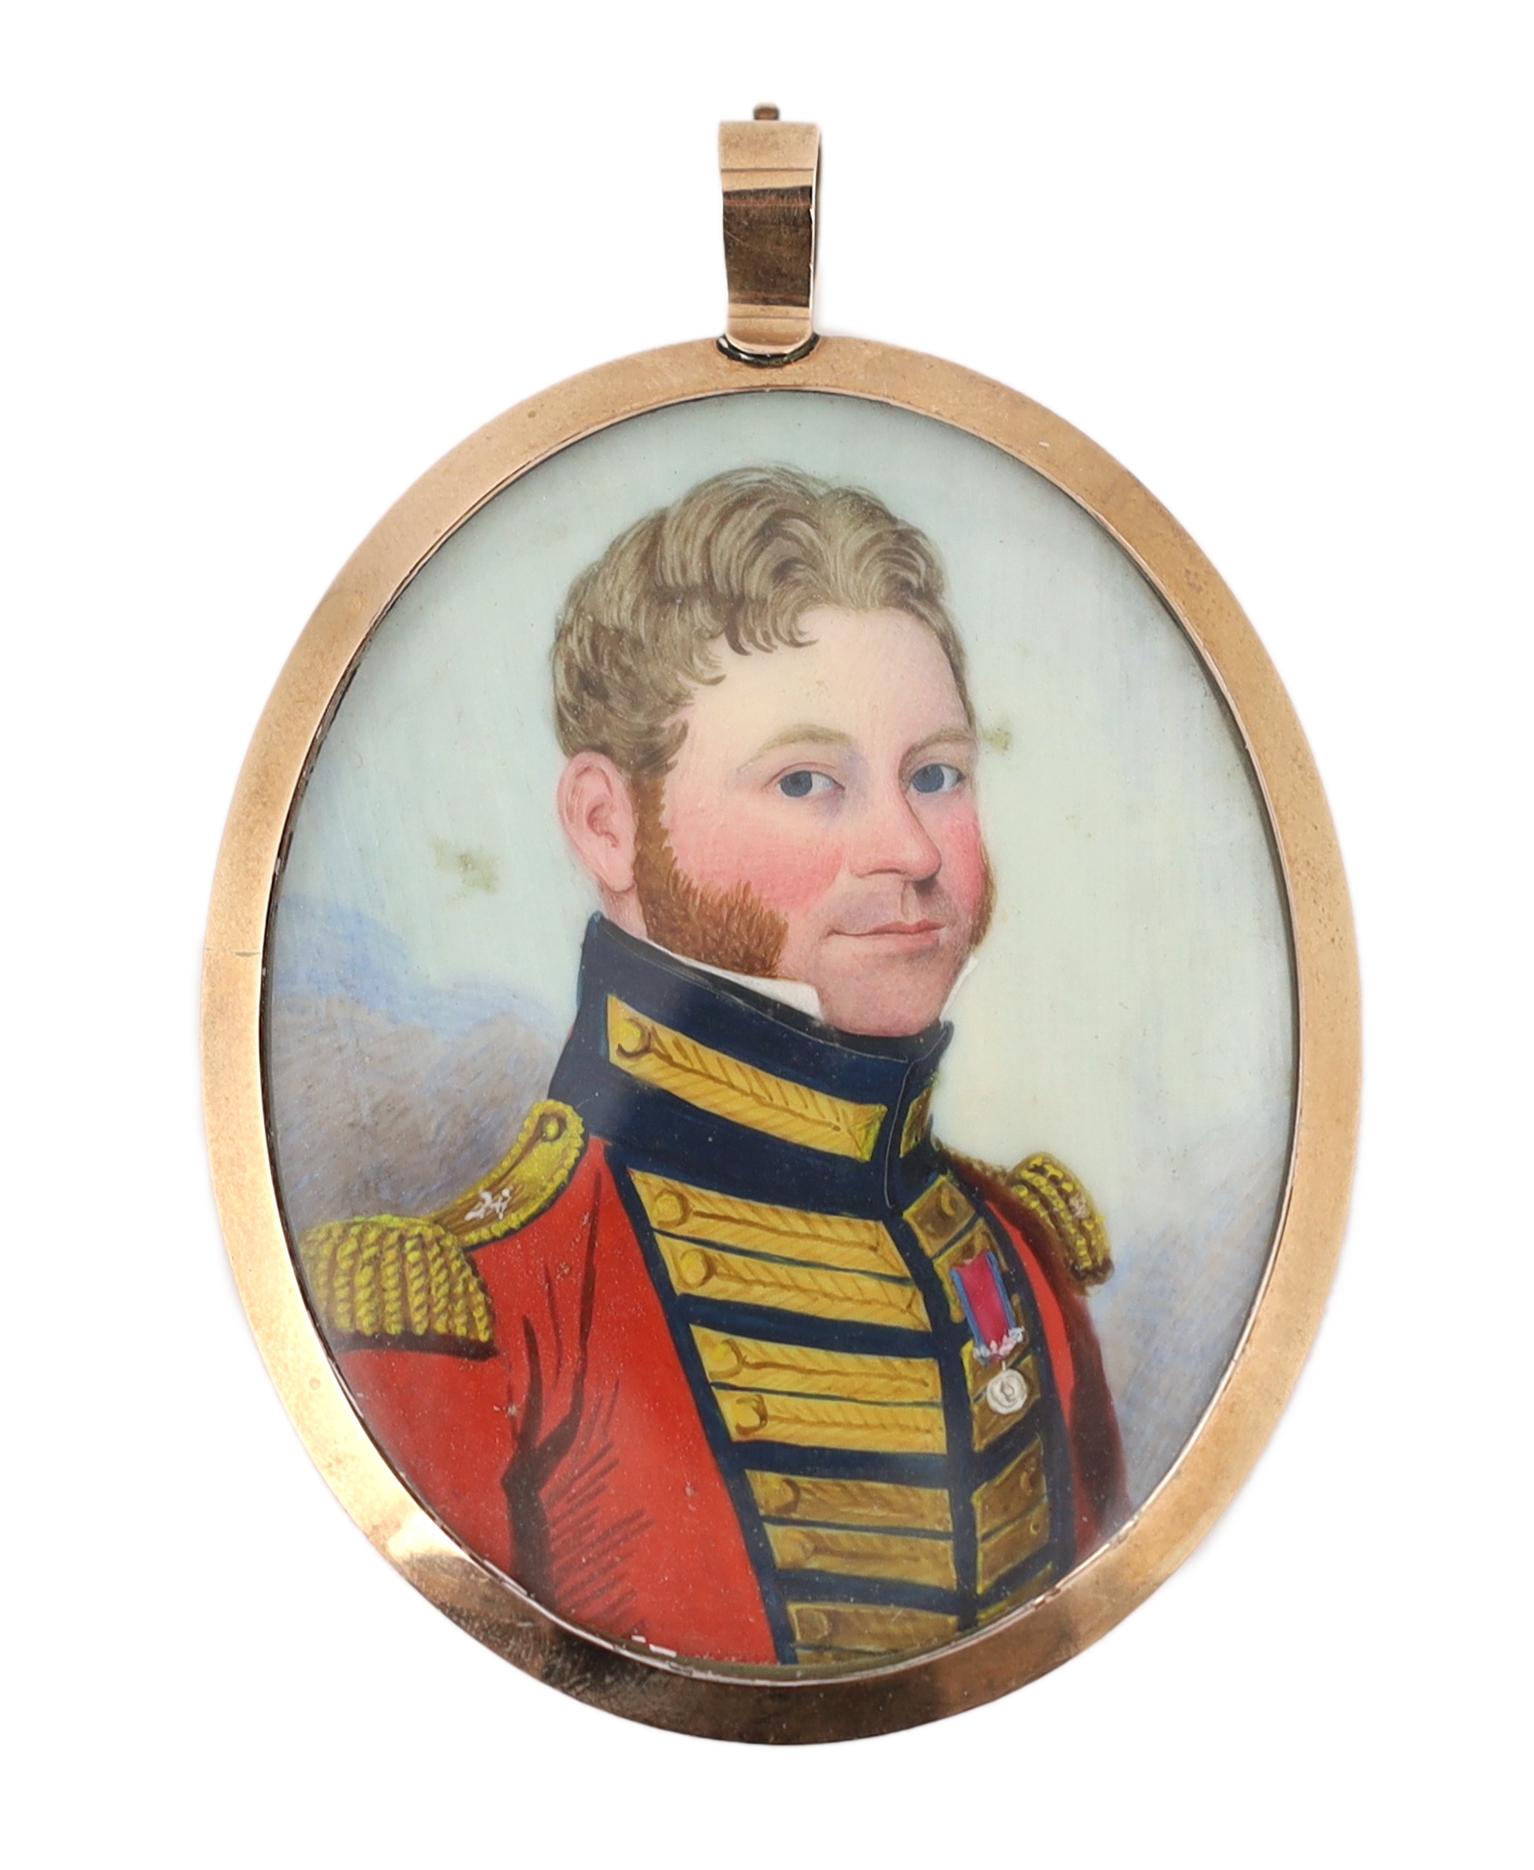 Frederick Buck (Irish, 1771-1840), Portrait miniature of an army officer, watercolour on ivory, 6.3 x 5cm. CITES Submission reference 9P8BAD54